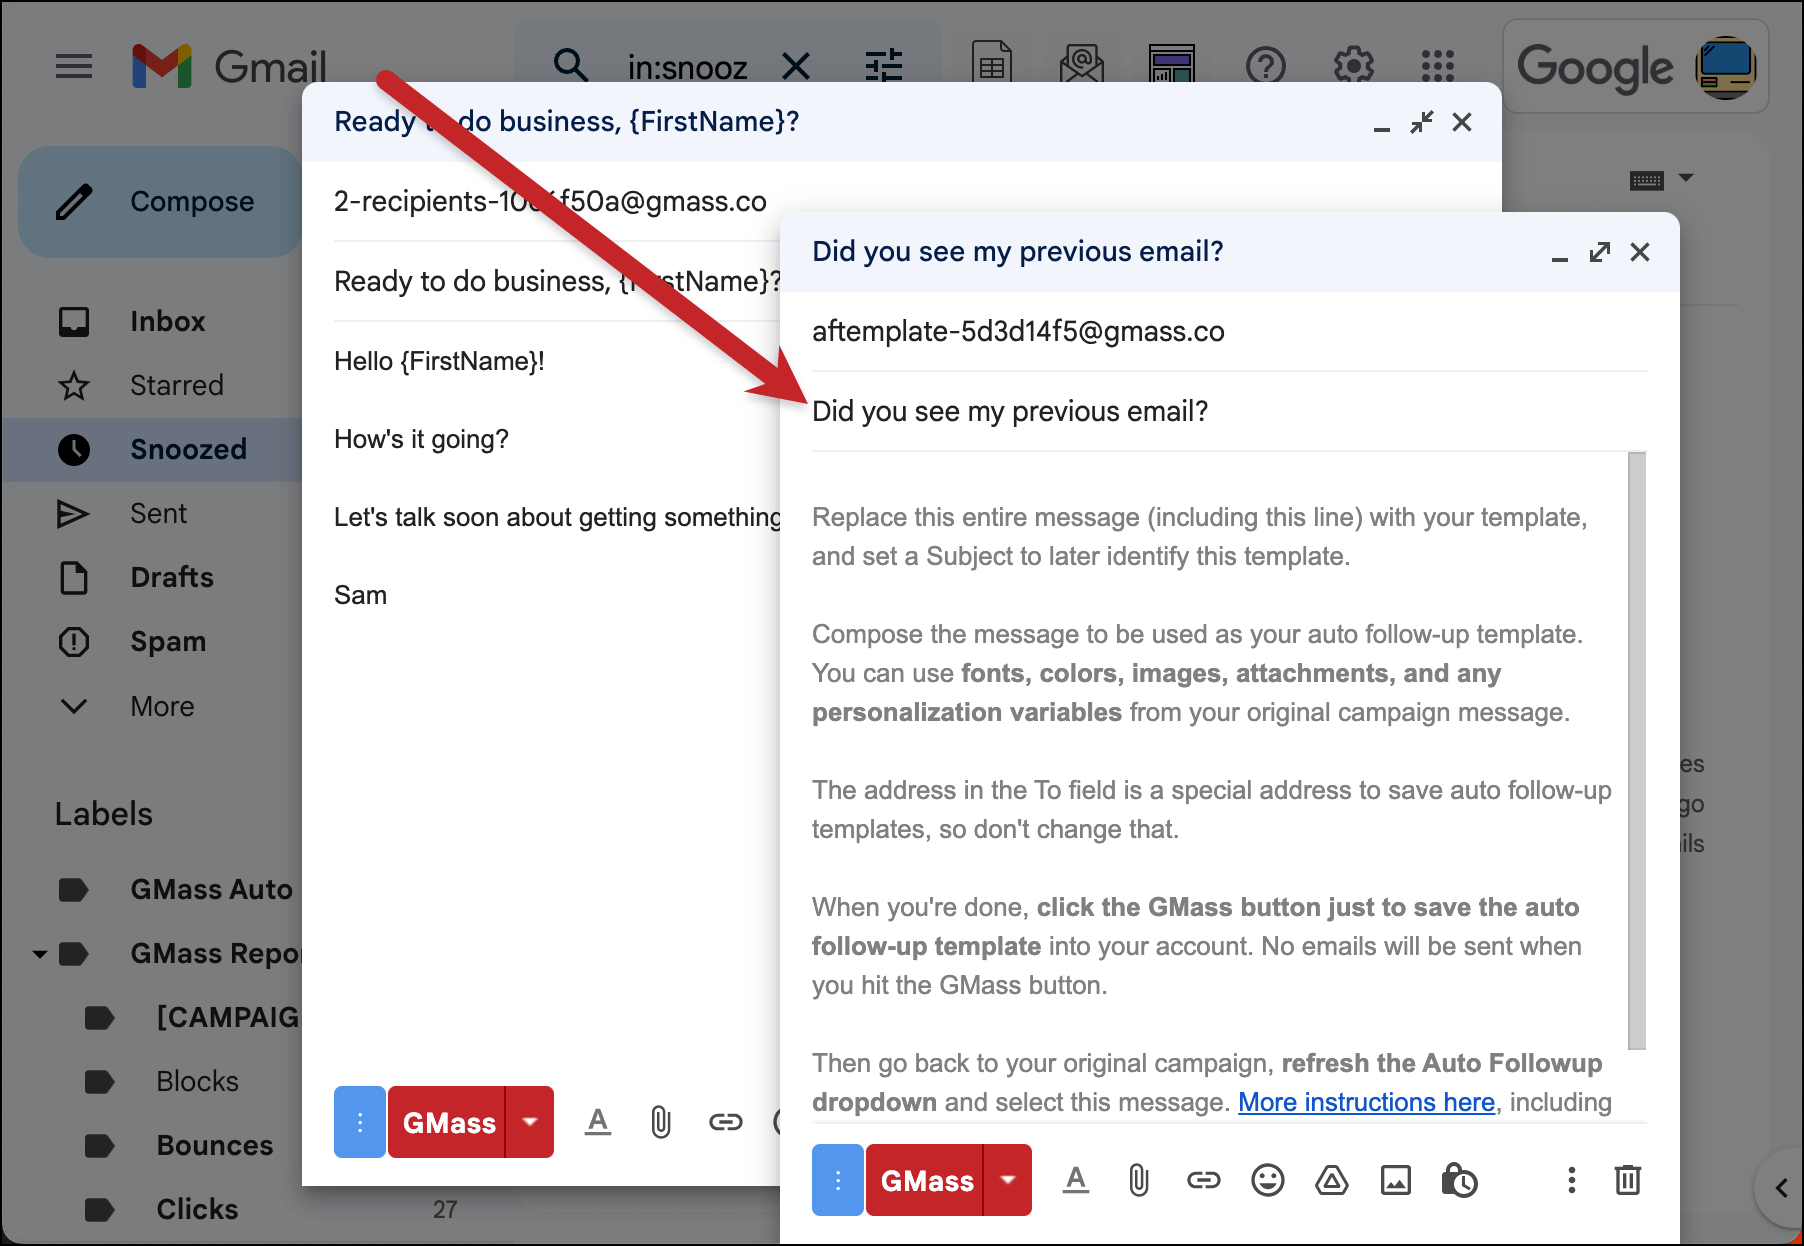 Change the subject line of the rich text follow-up